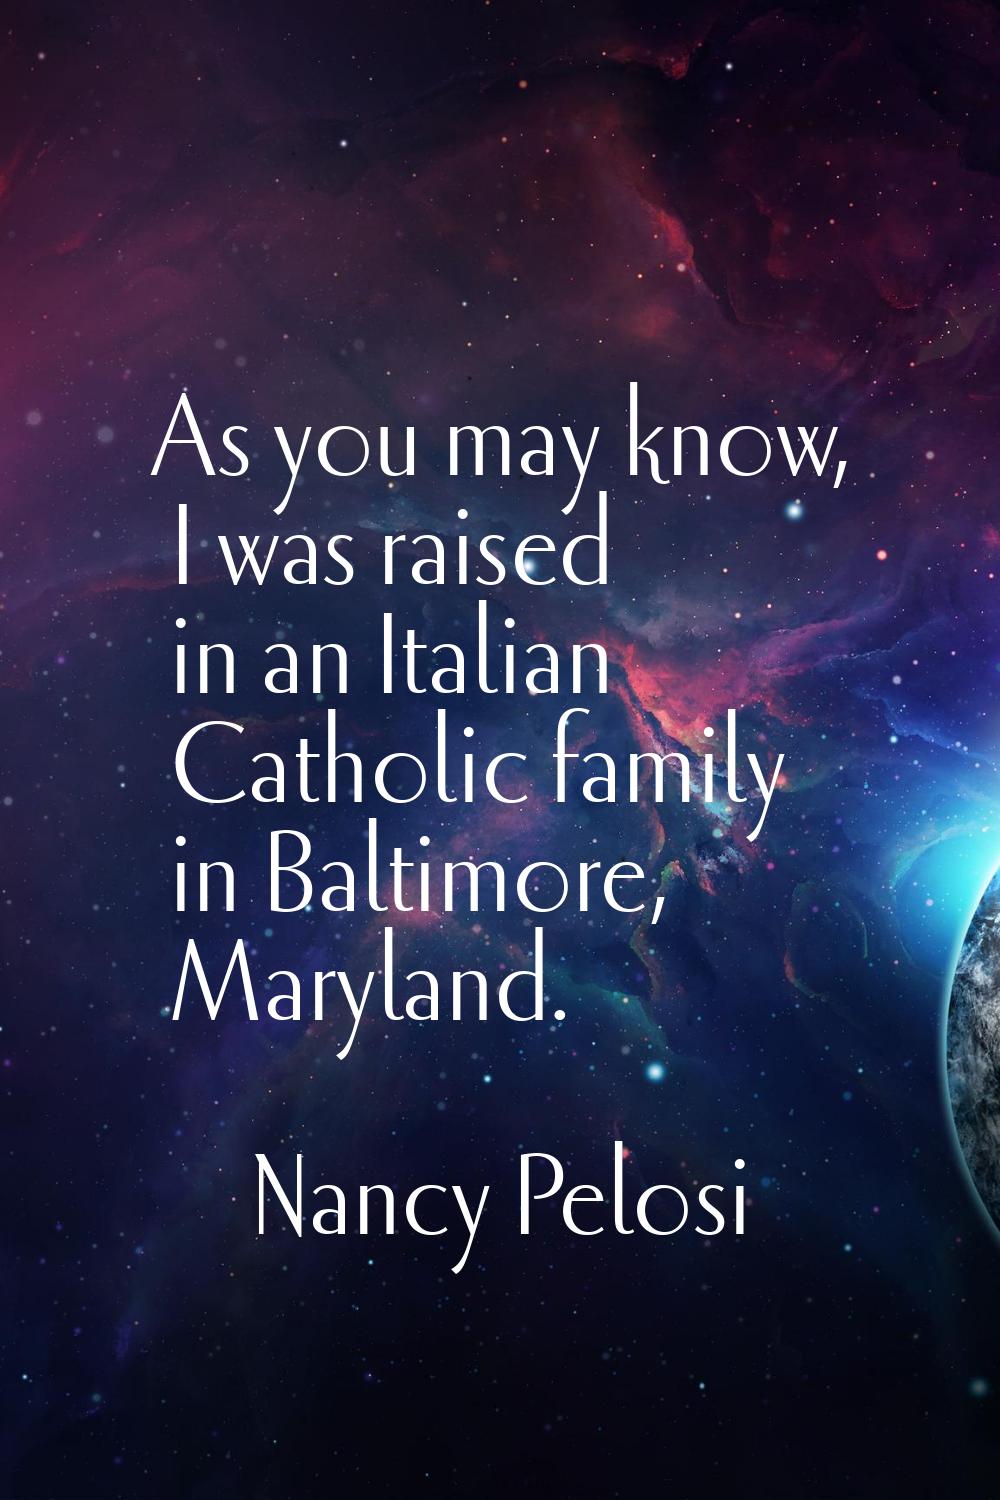 As you may know, I was raised in an Italian Catholic family in Baltimore, Maryland.